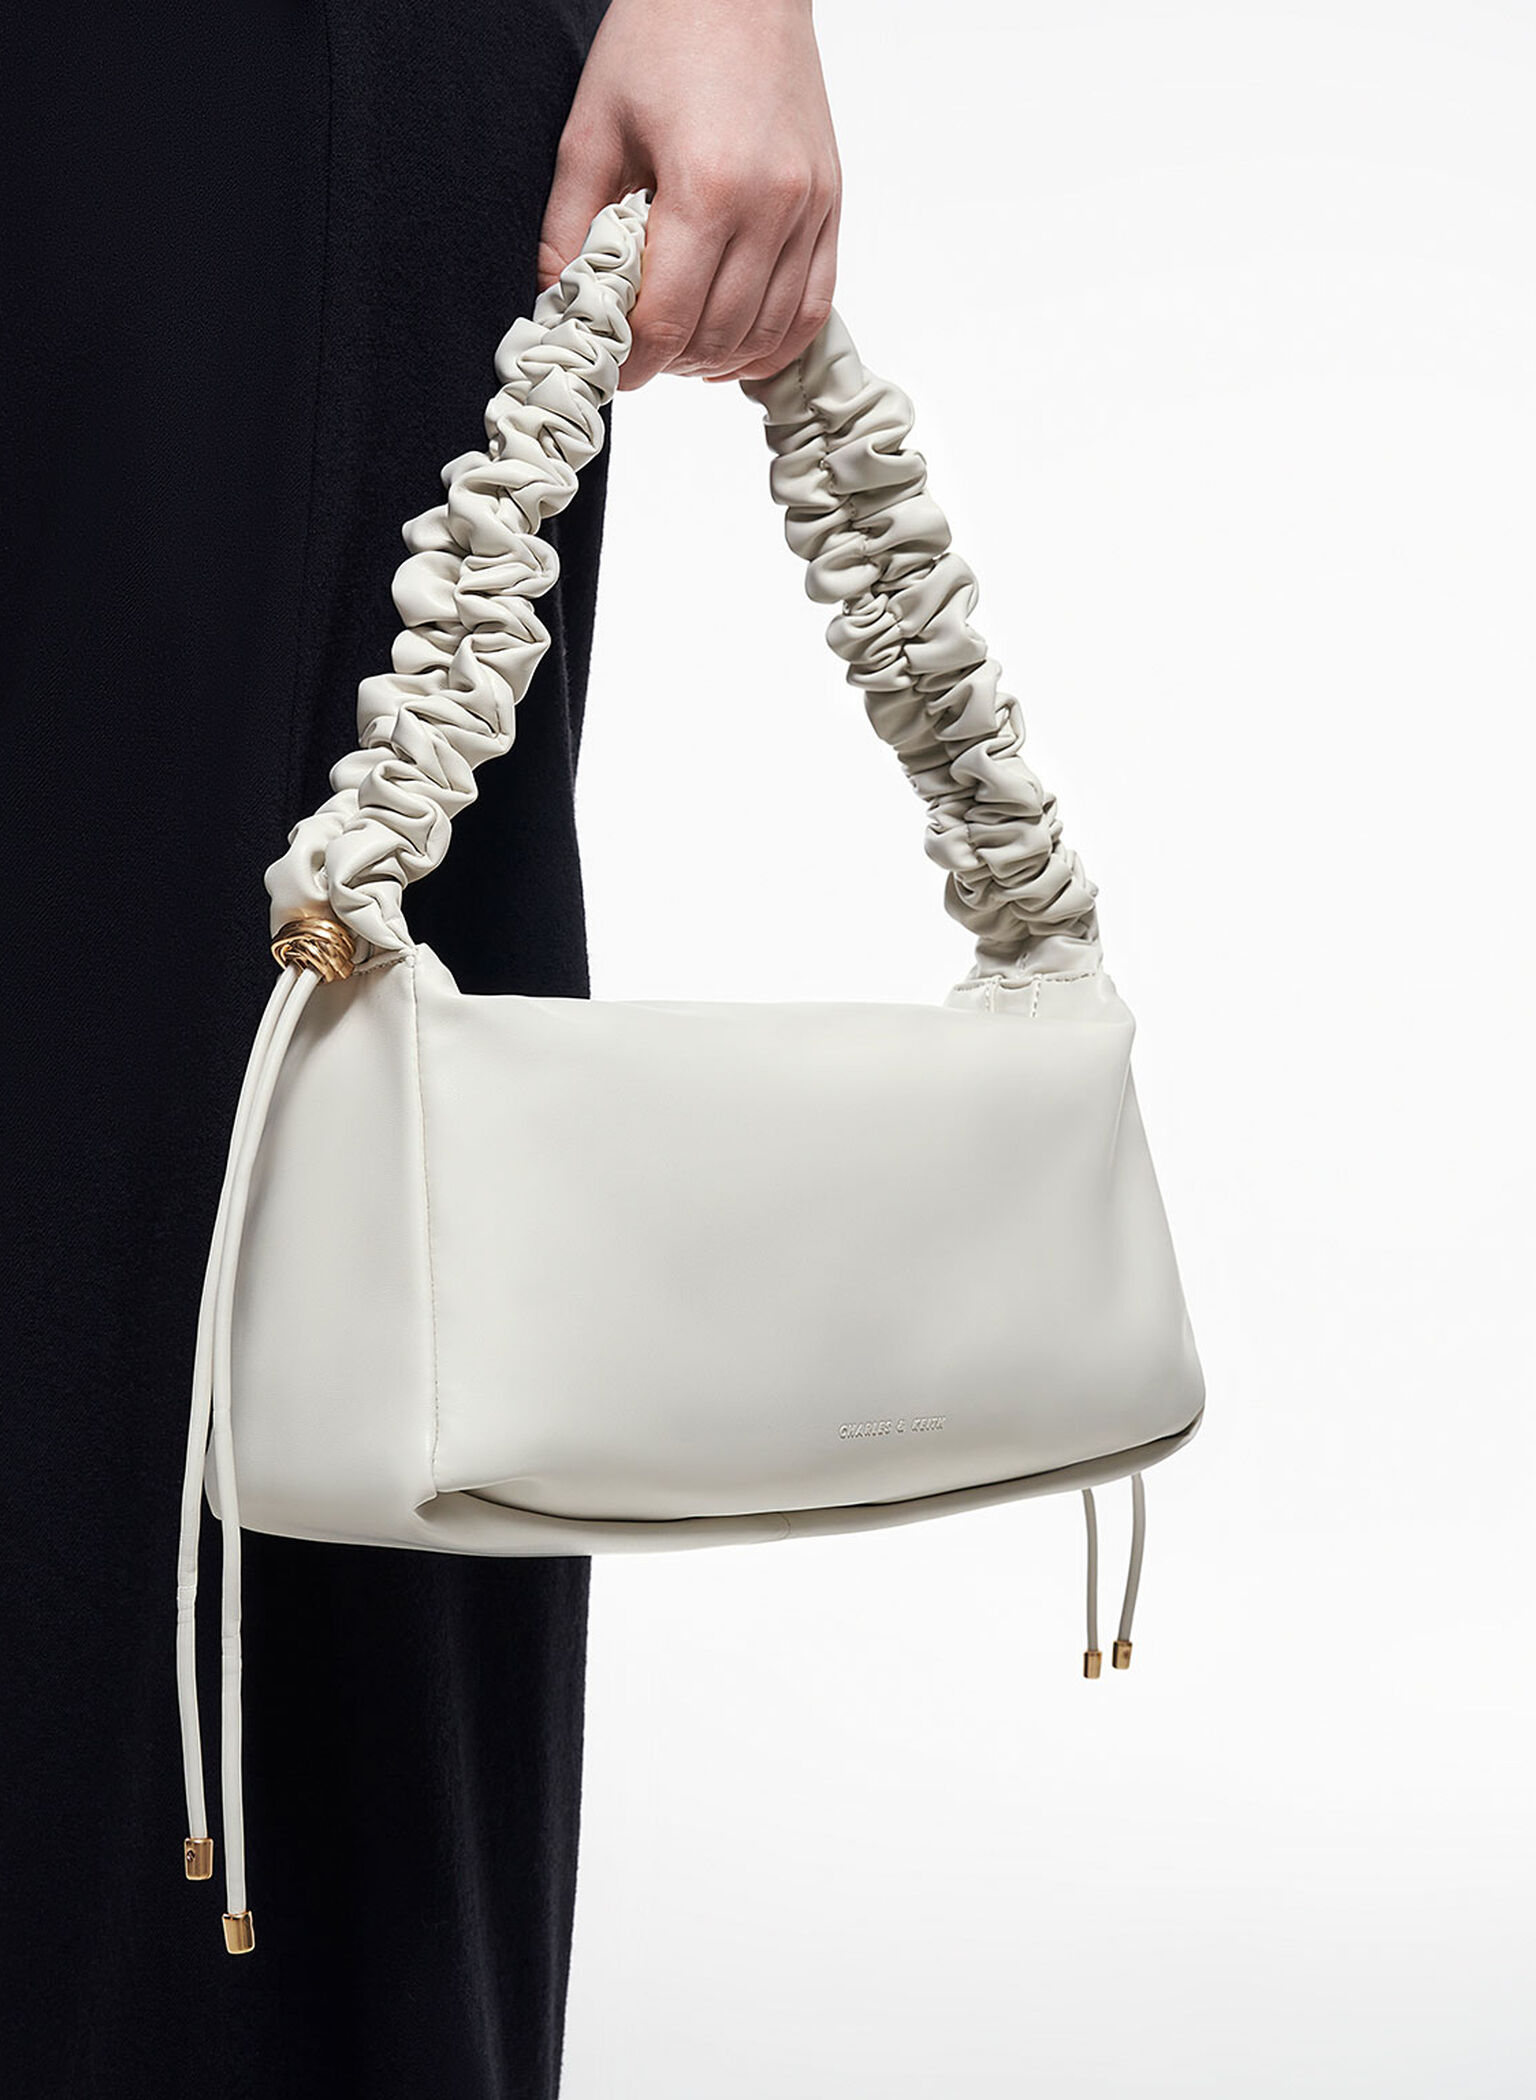 Cosette Ruched Handle Bag, White, hi-res